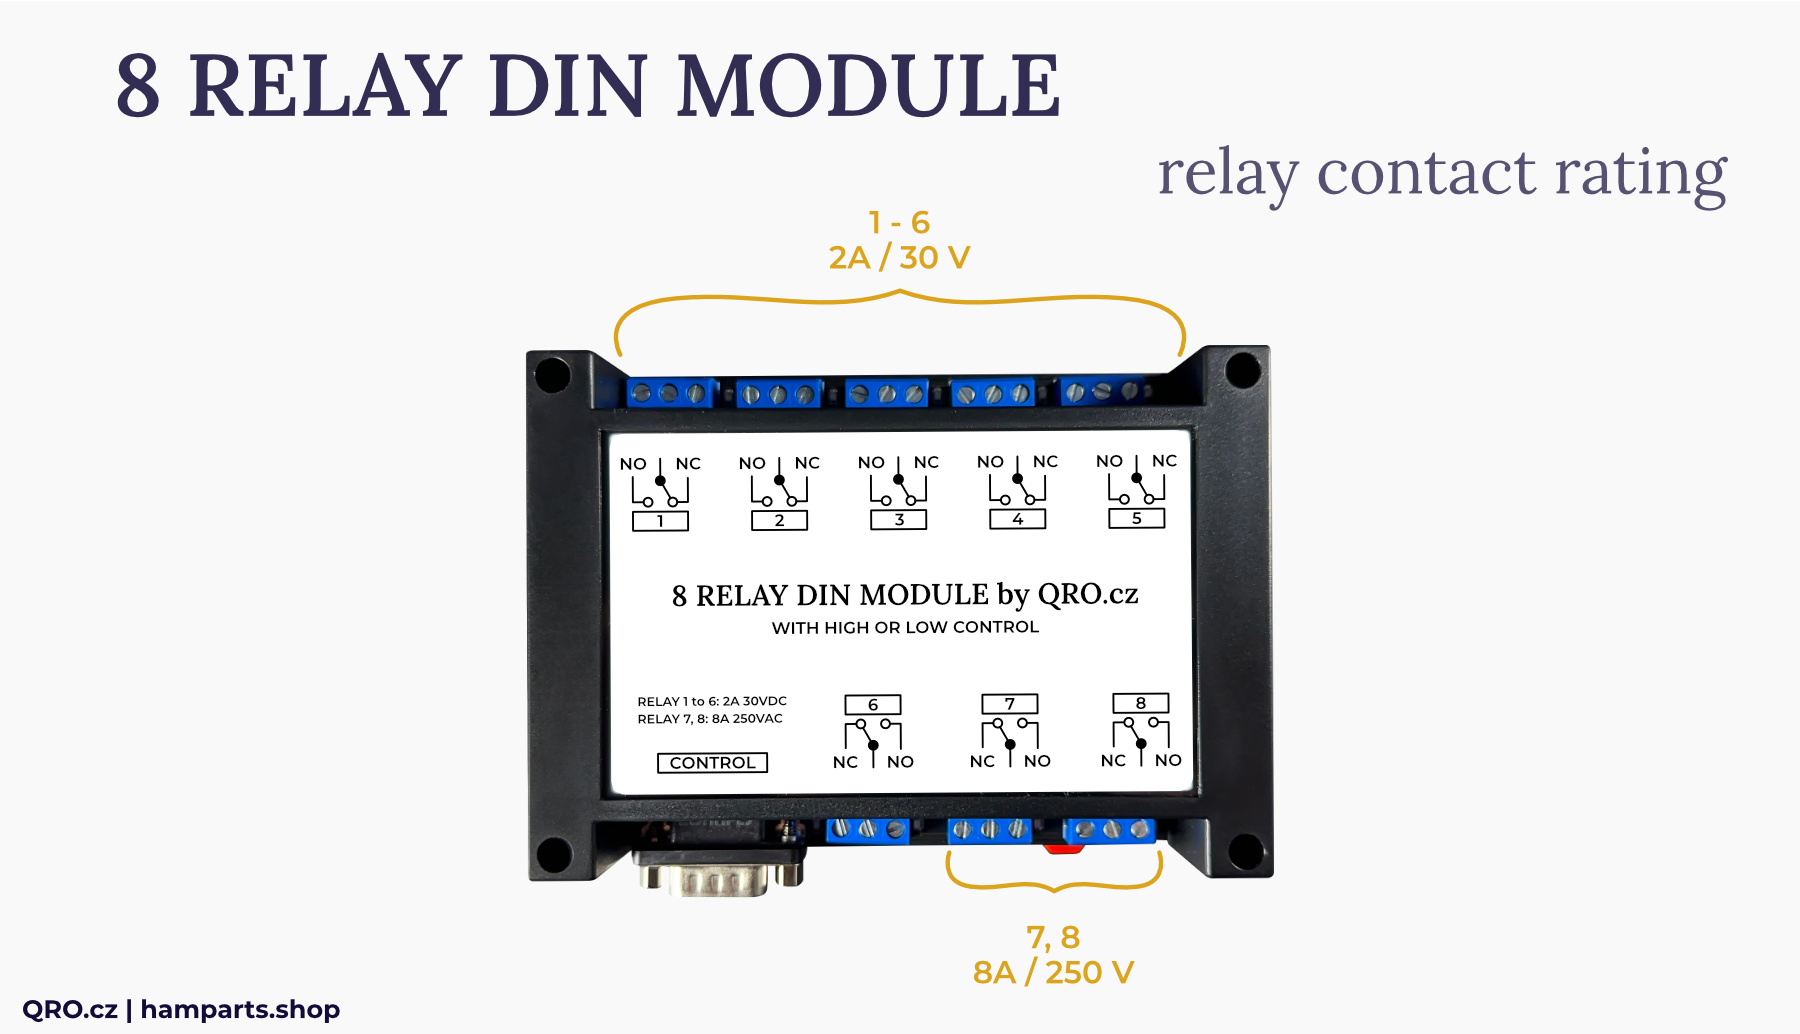 8 relay din module contact rating qro.cz hamparts.shop